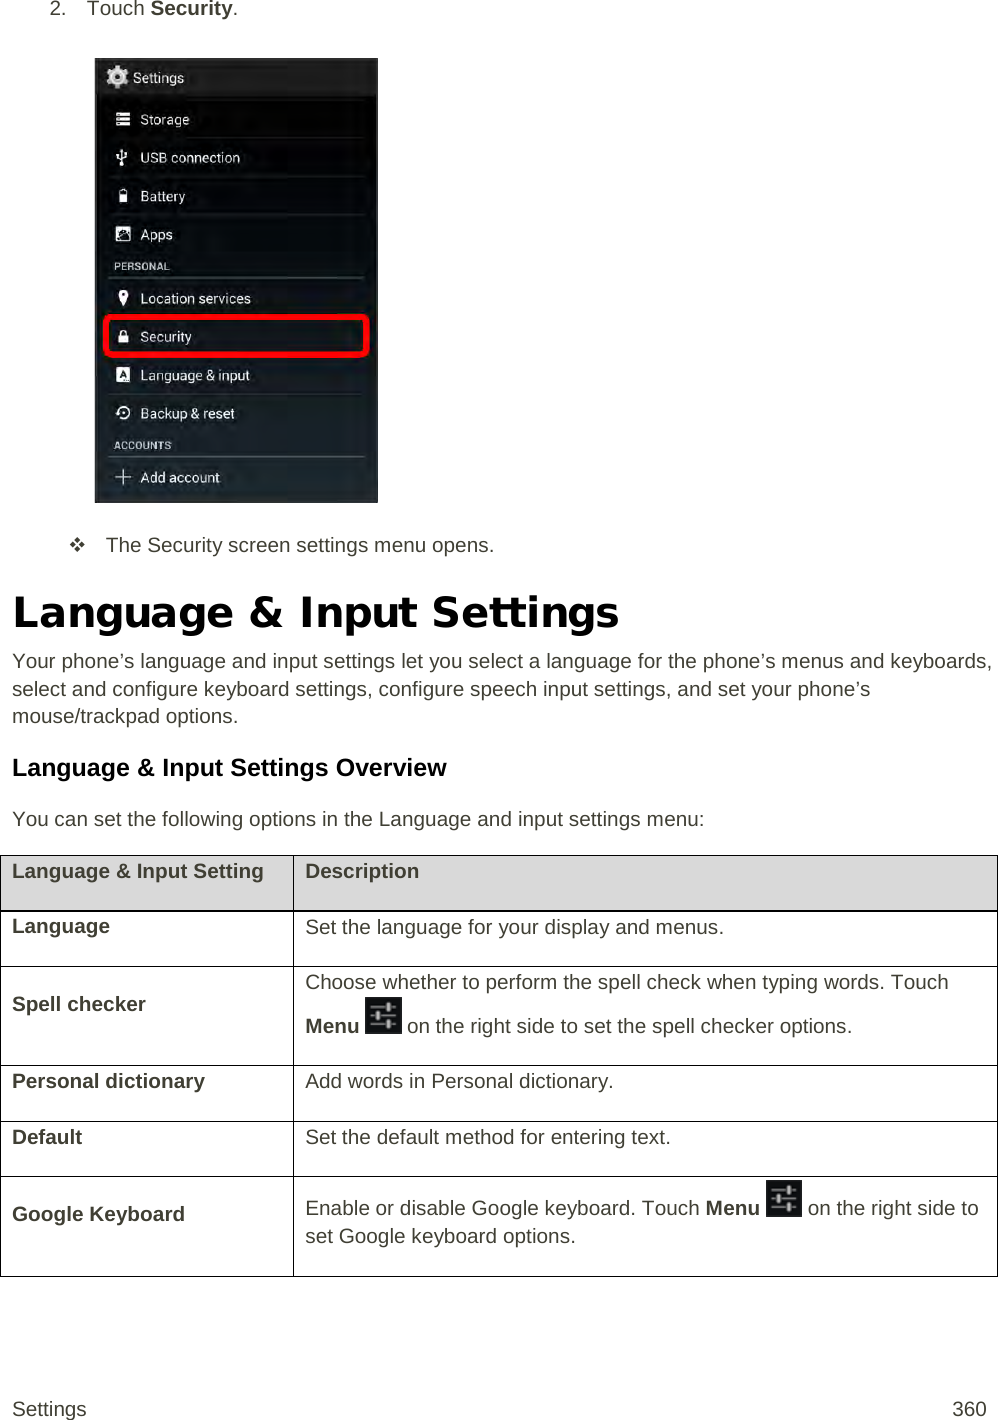 2. Touch Security.    The Security screen settings menu opens. Language &amp; Input Settings Your phone’s language and input settings let you select a language for the phone’s menus and keyboards, select and configure keyboard settings, configure speech input settings, and set your phone’s mouse/trackpad options. Language &amp; Input Settings Overview You can set the following options in the Language and input settings menu: Language &amp; Input Setting Description Language Set the language for your display and menus. Spell checker Choose whether to perform the spell check when typing words. Touch Menu   on the right side to set the spell checker options. Personal dictionary Add words in Personal dictionary. Default Set the default method for entering text. Google Keyboard Enable or disable Google keyboard. Touch Menu   on the right side to set Google keyboard options. Settings 360 